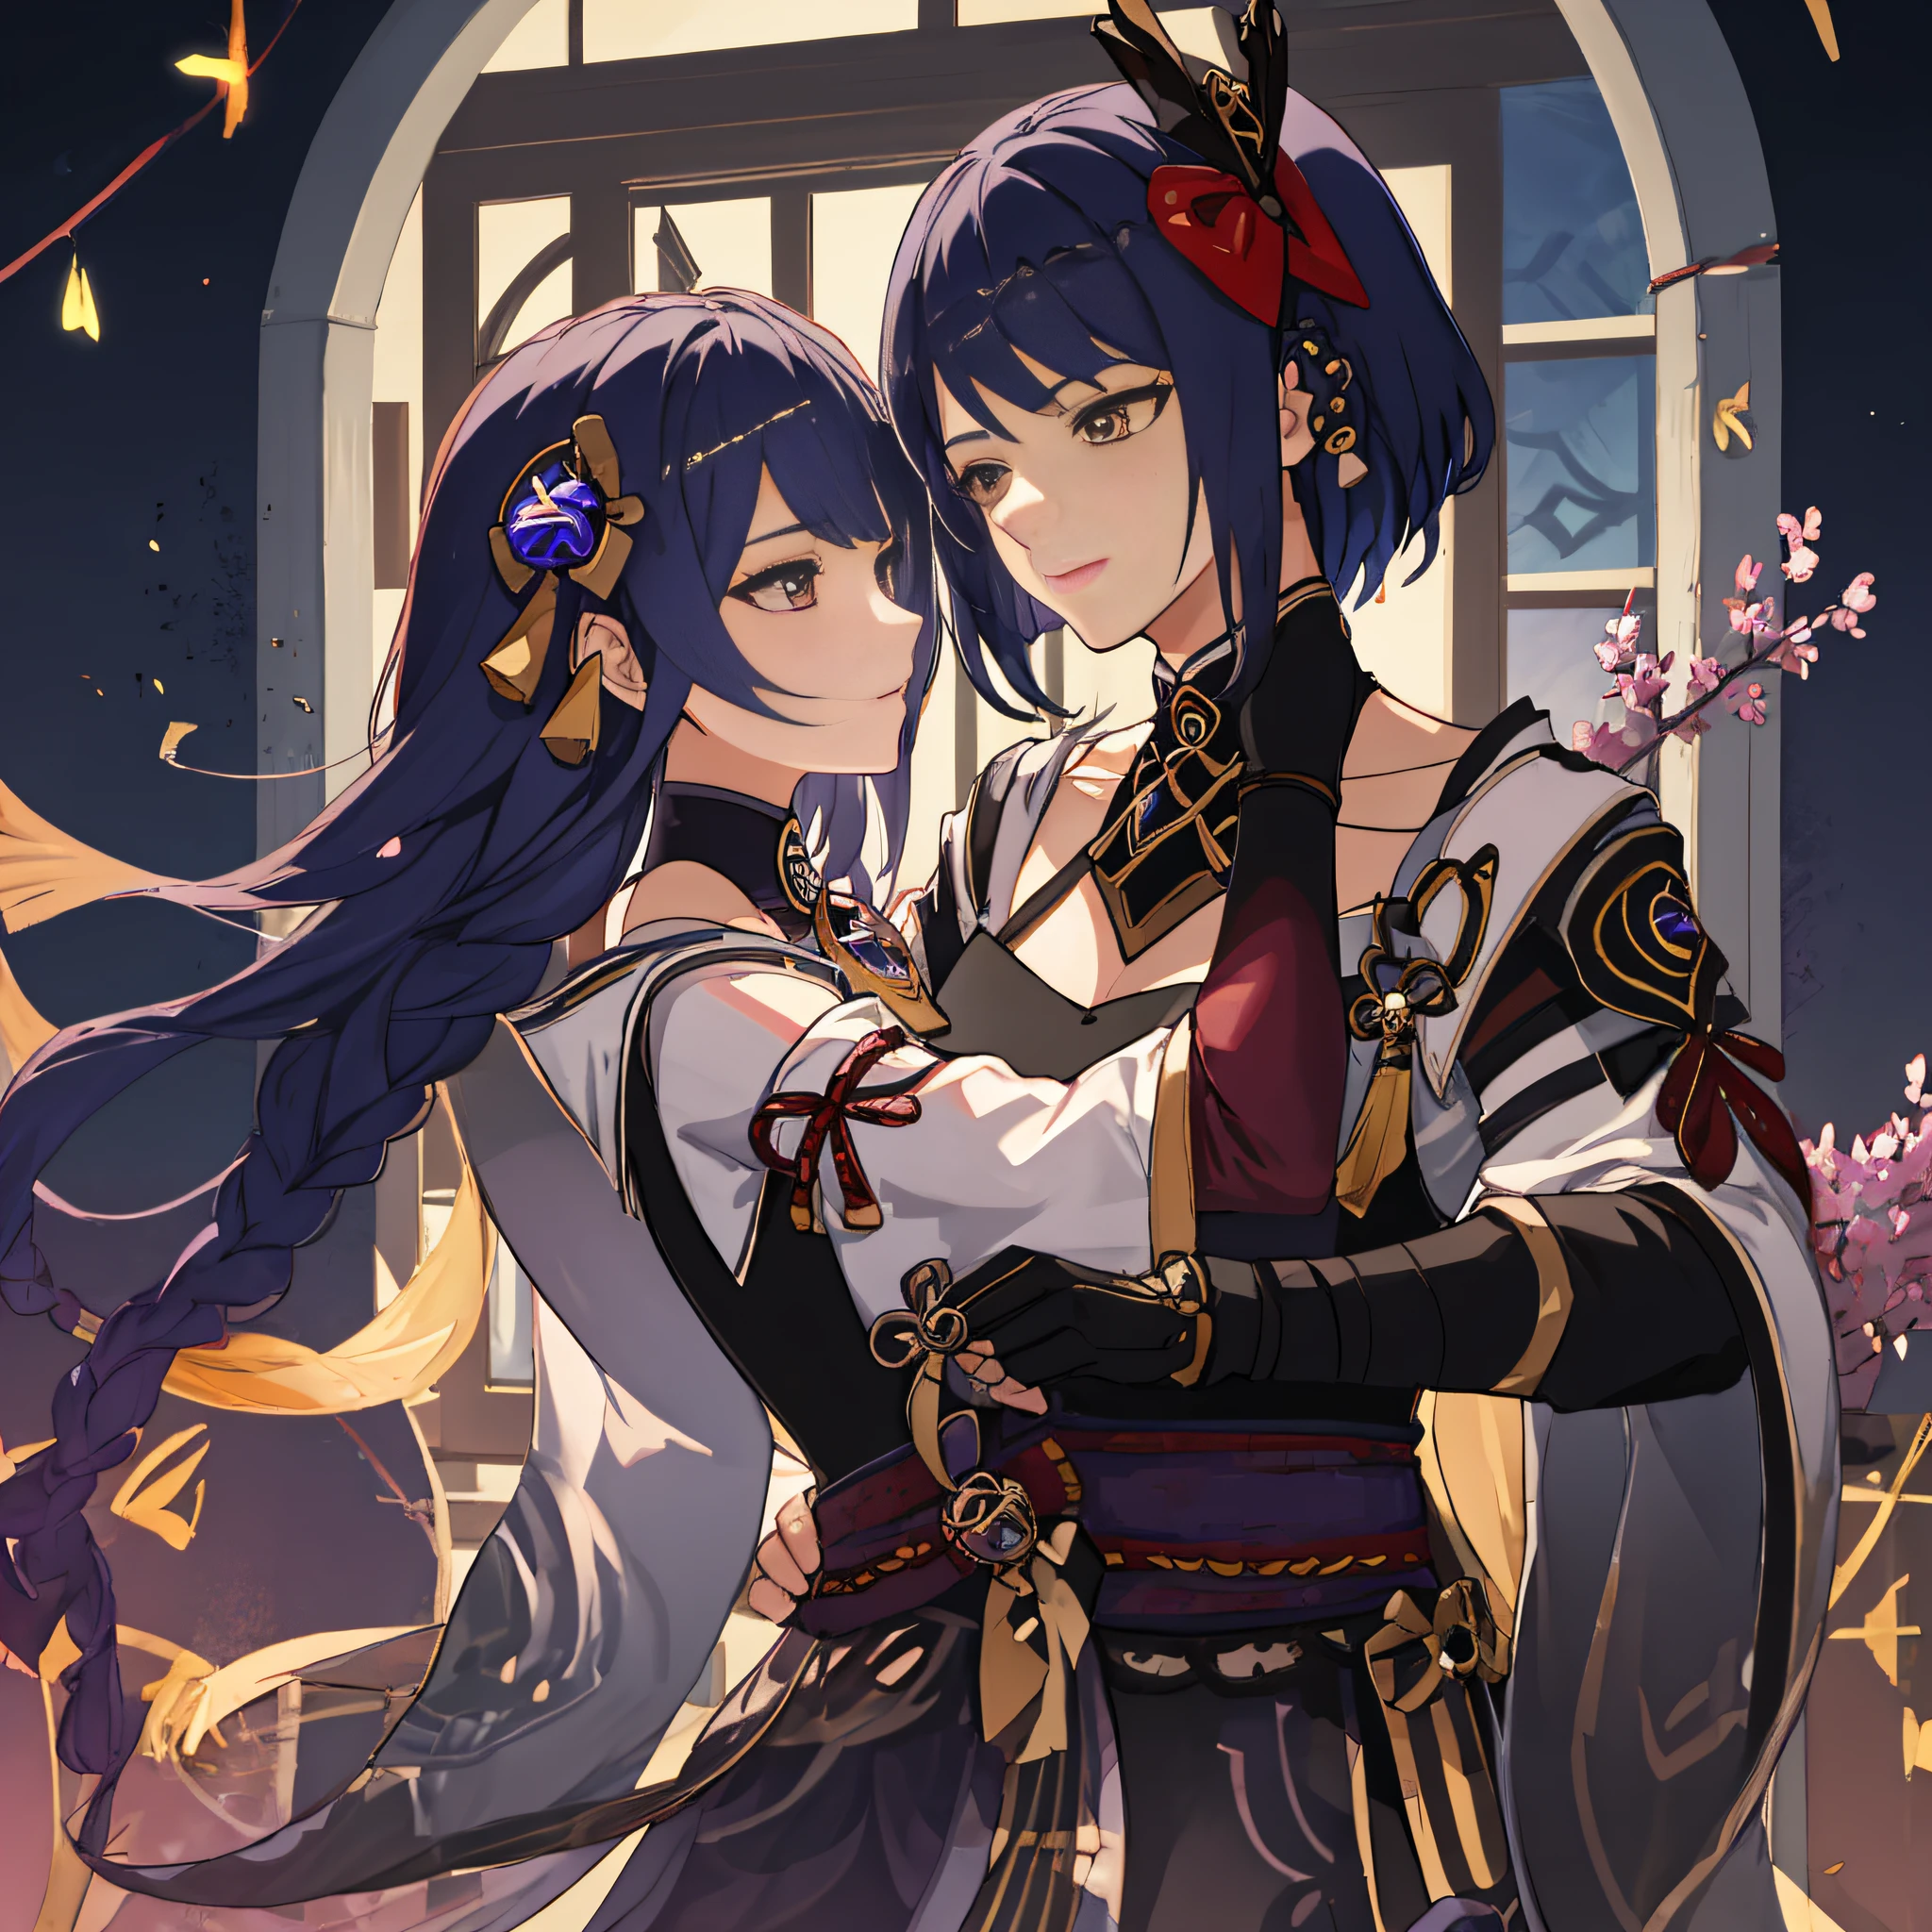 Anime couple hugging in front of a large window with a clock, Keqing from Genshin Impact, genshin, Ayaka Genshin Impact, Zhongli from Genshin impact, from the azur lane videogame, Onmyoji Portrait, Genshin Impact, Game Ayaka Genshin Impact, Onmyoji Detail Art, charachter: Genshin Impact